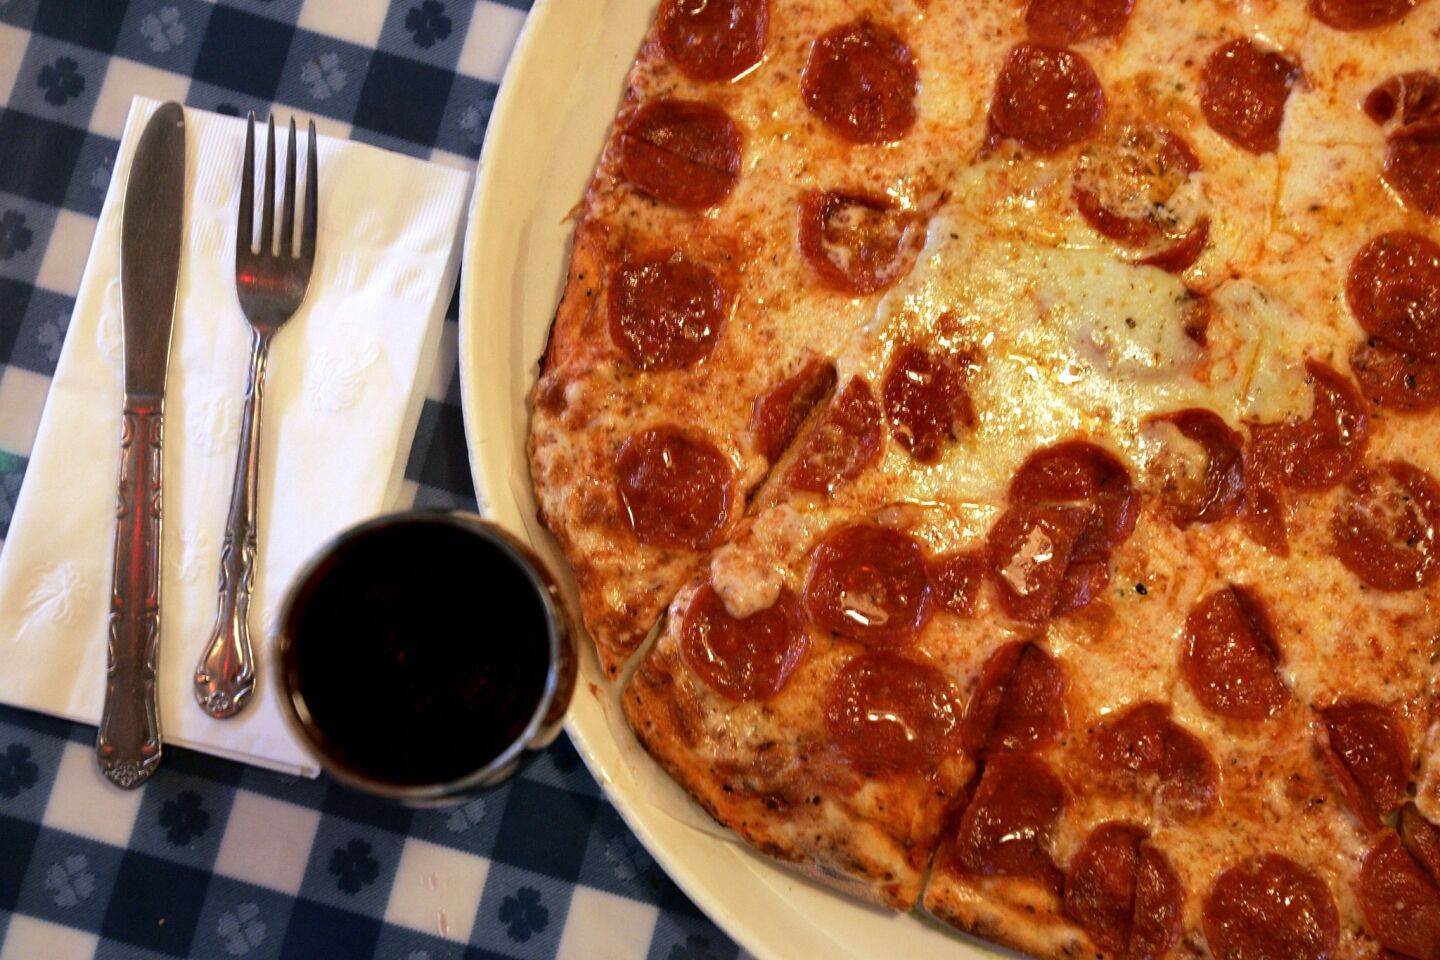 The pizzas at Casa Bianca are thin-crusted and crazy-cut like the South Side Chicago bar pies on which founder Sam Martorana modeled them.